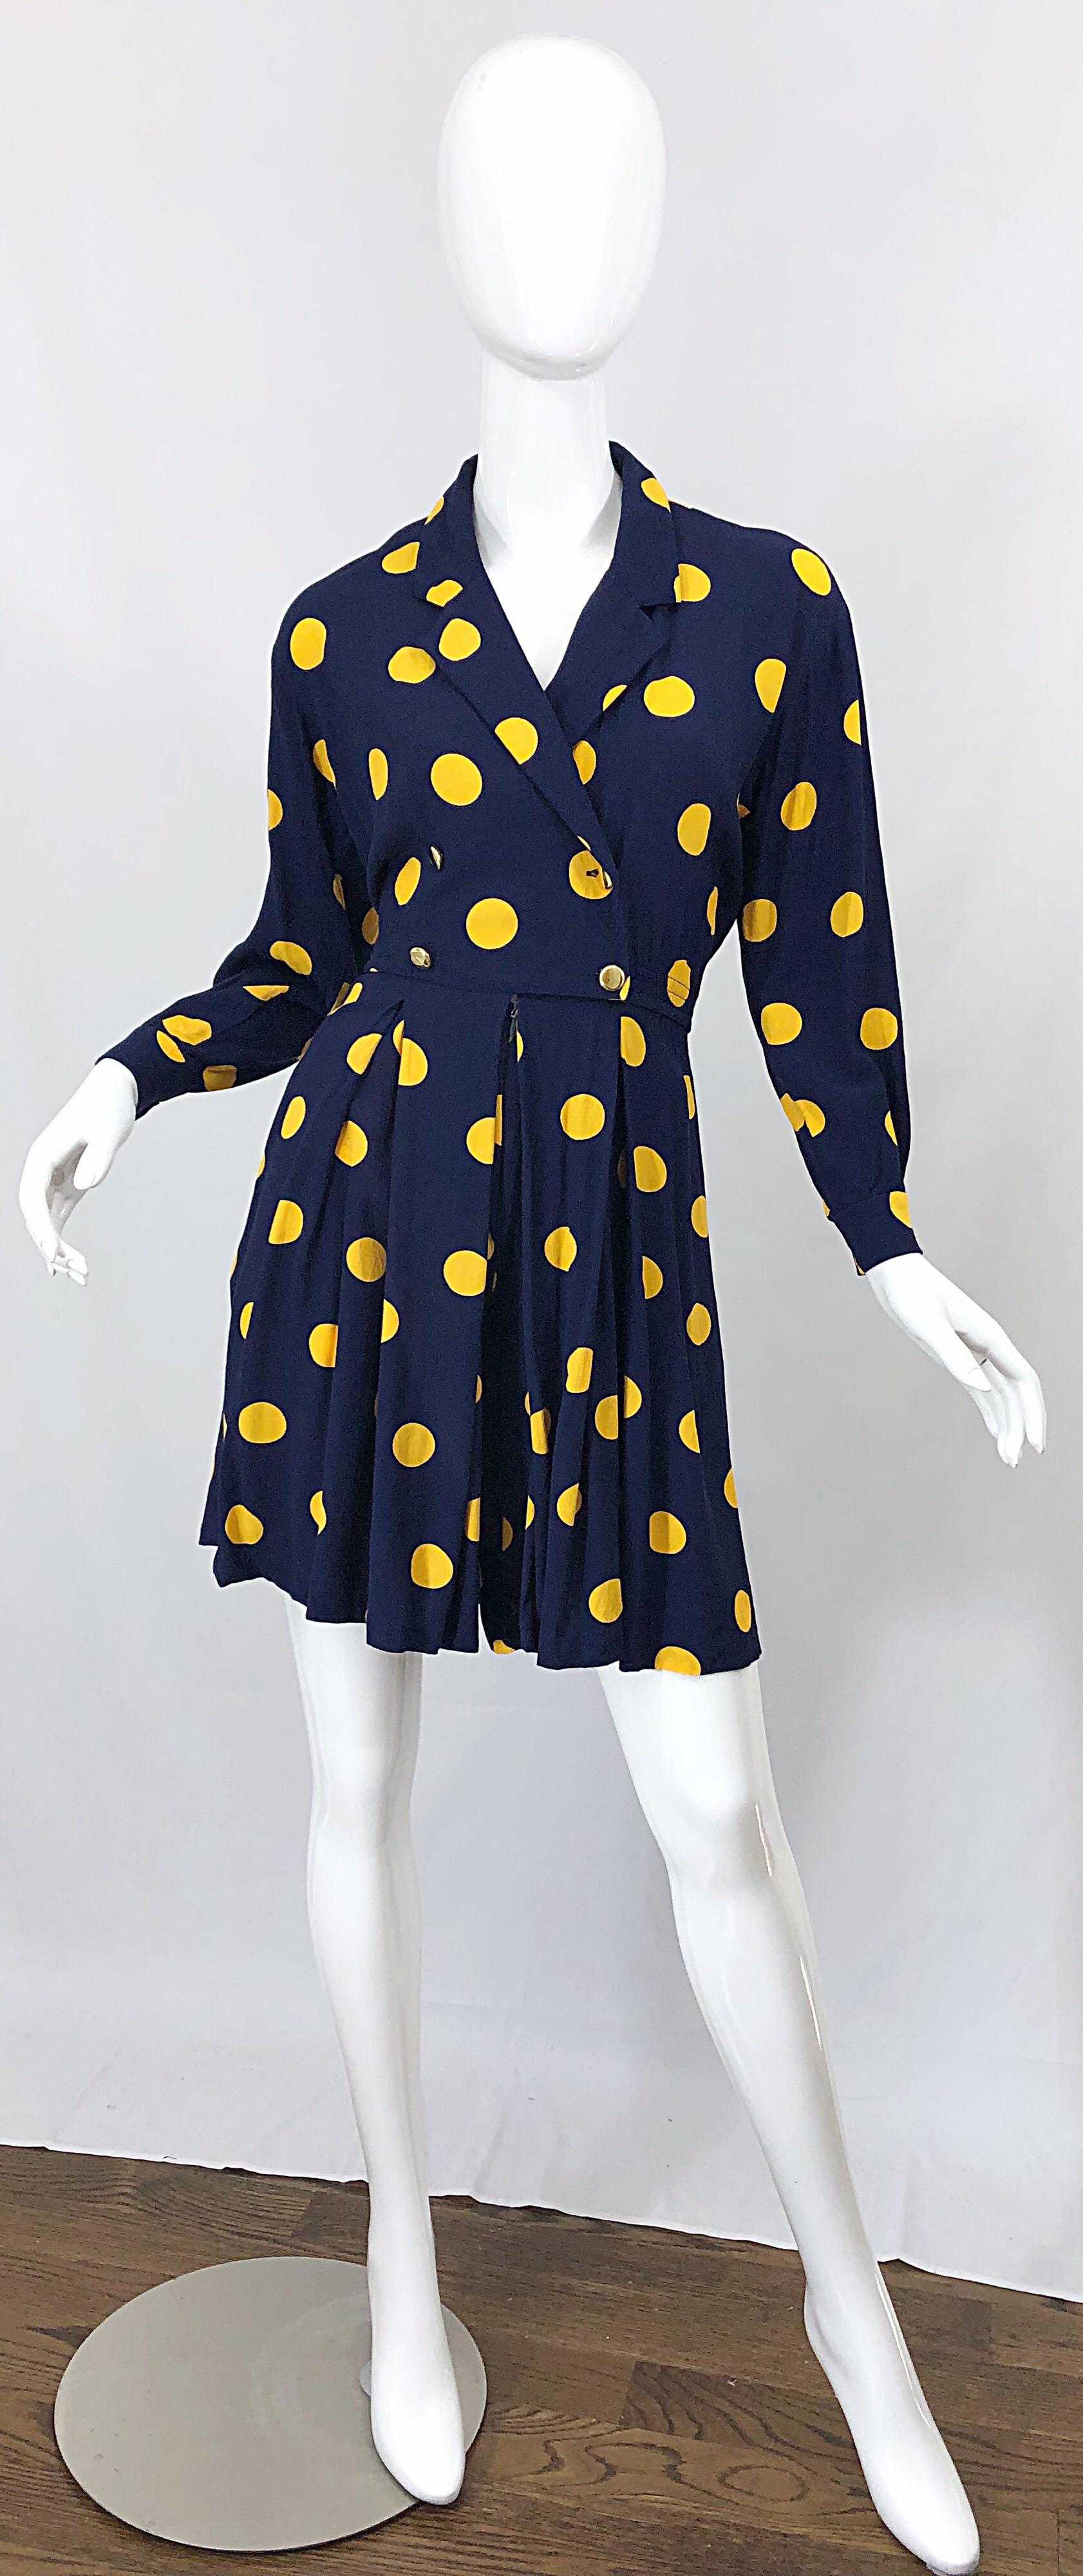 Size 8 Romper Late 1980s Navy Blue and Yellow Polka Dot 80s Vintage Romper 5